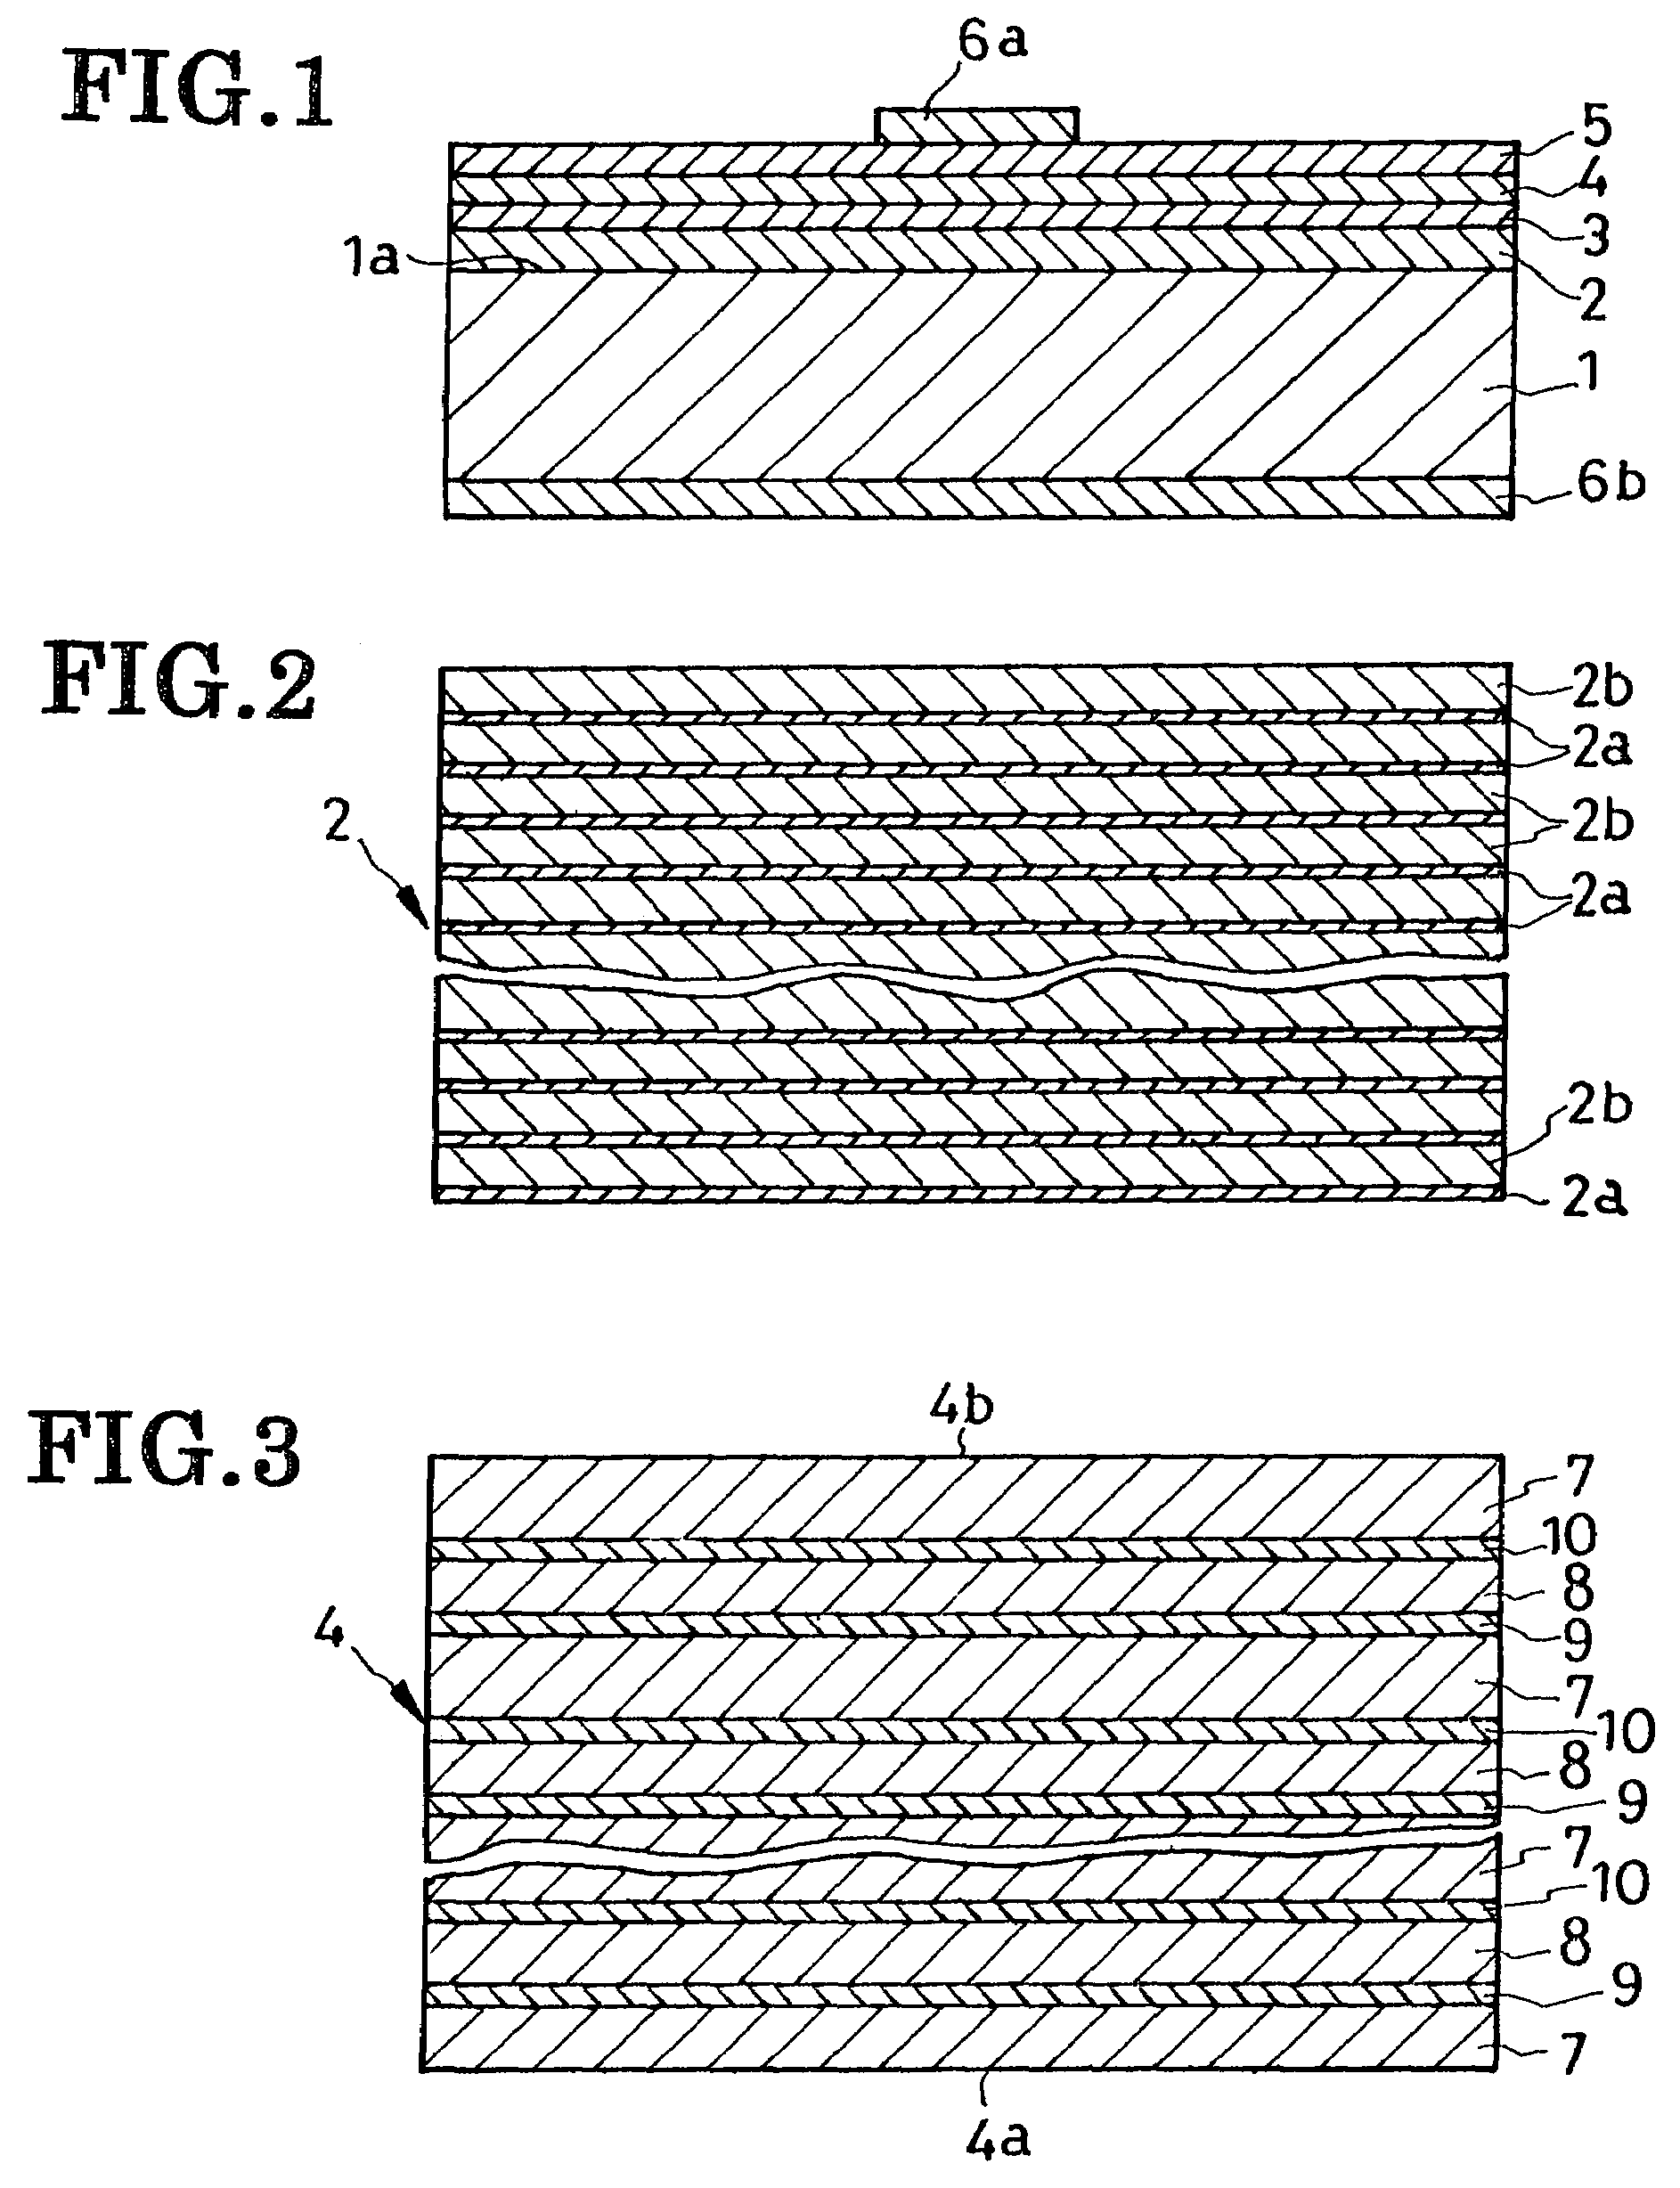 Light-emitting semiconductor device having a quantum well active layer, and method of fabrication